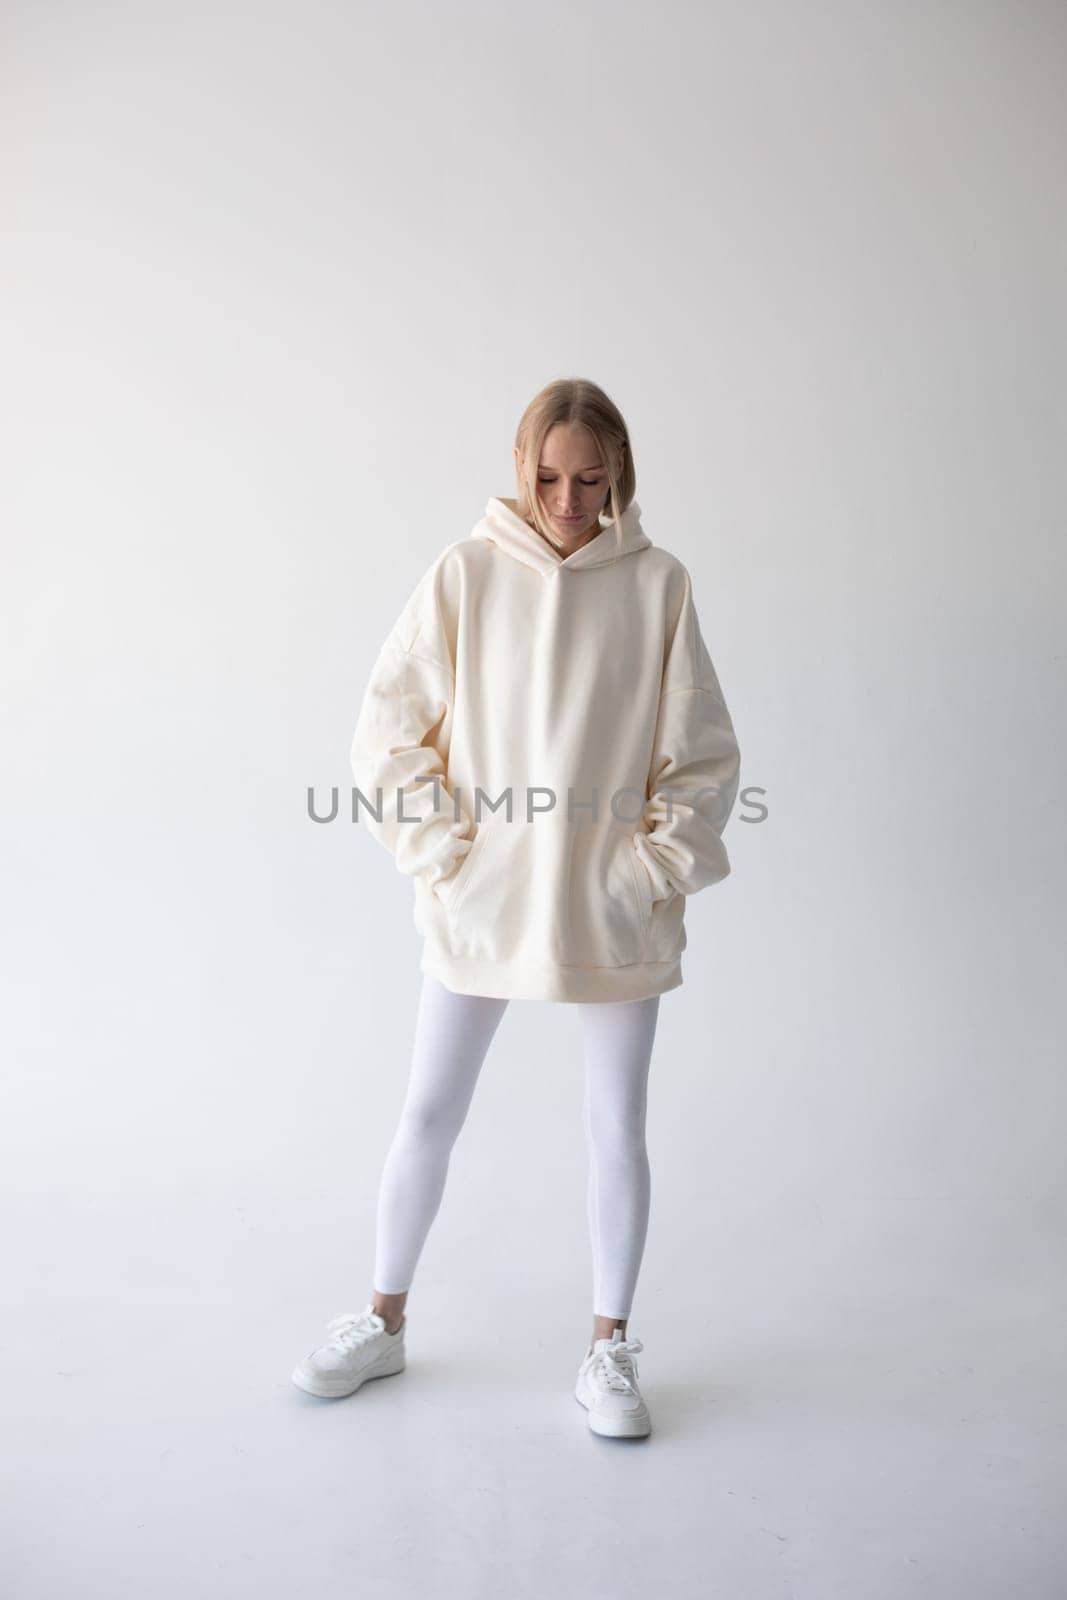 Blonde girl in a white hoodie and tights posing on a white background by Freeman_Studio